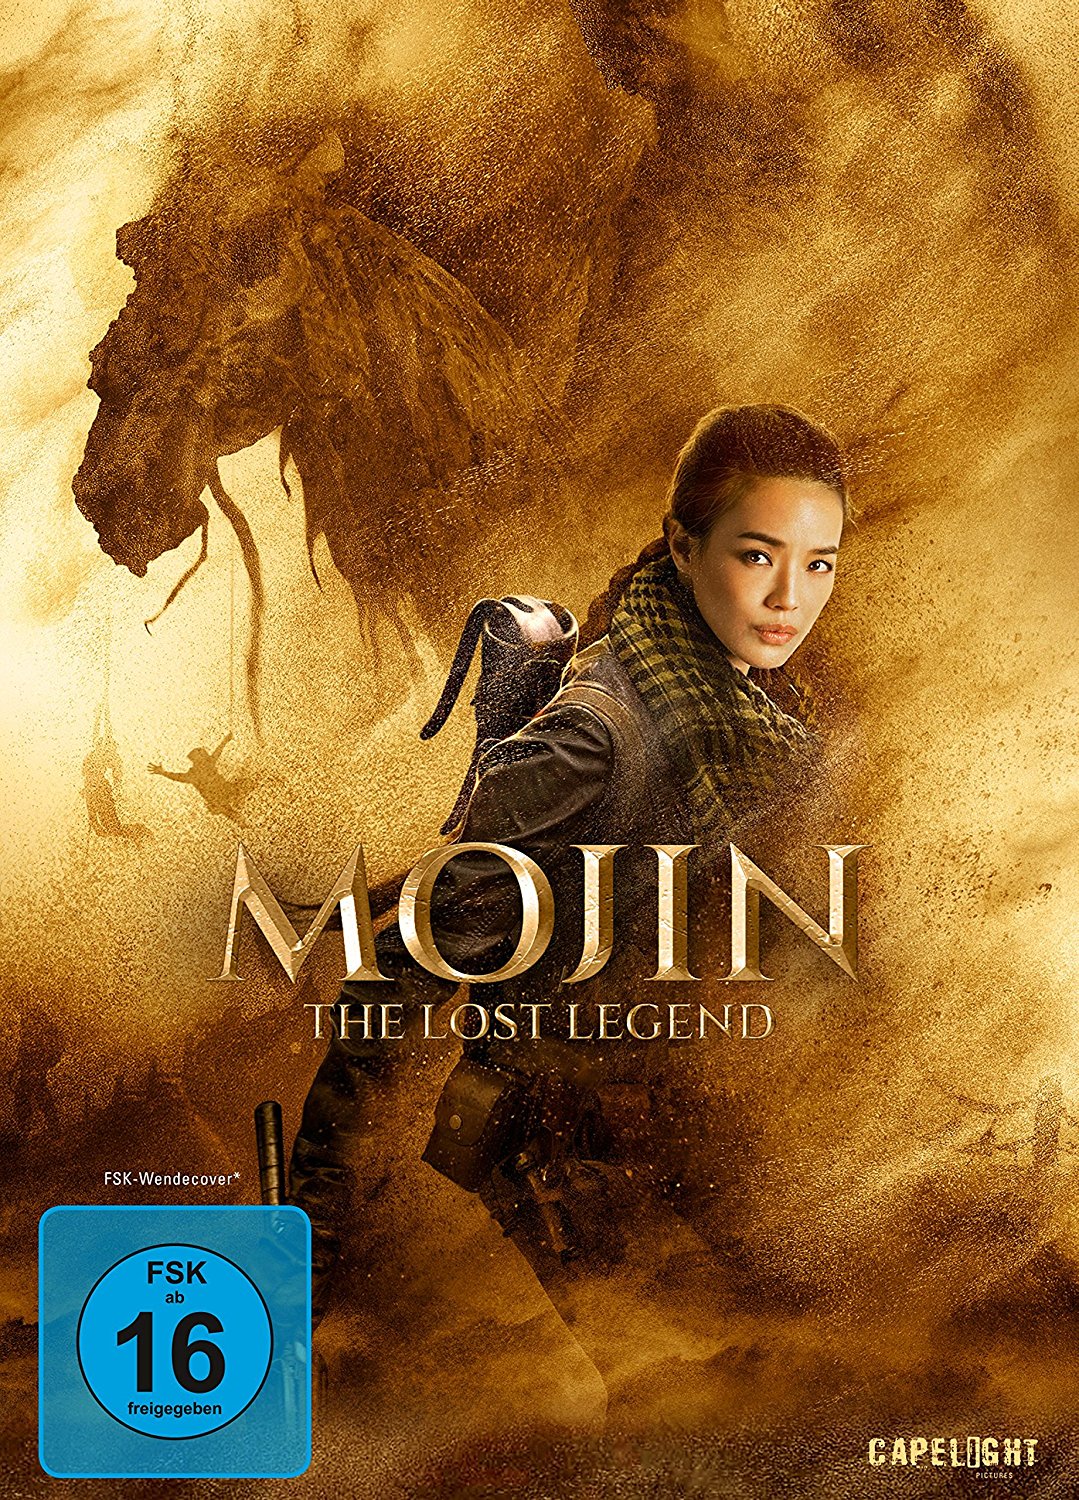 mojin the lost legend reviews